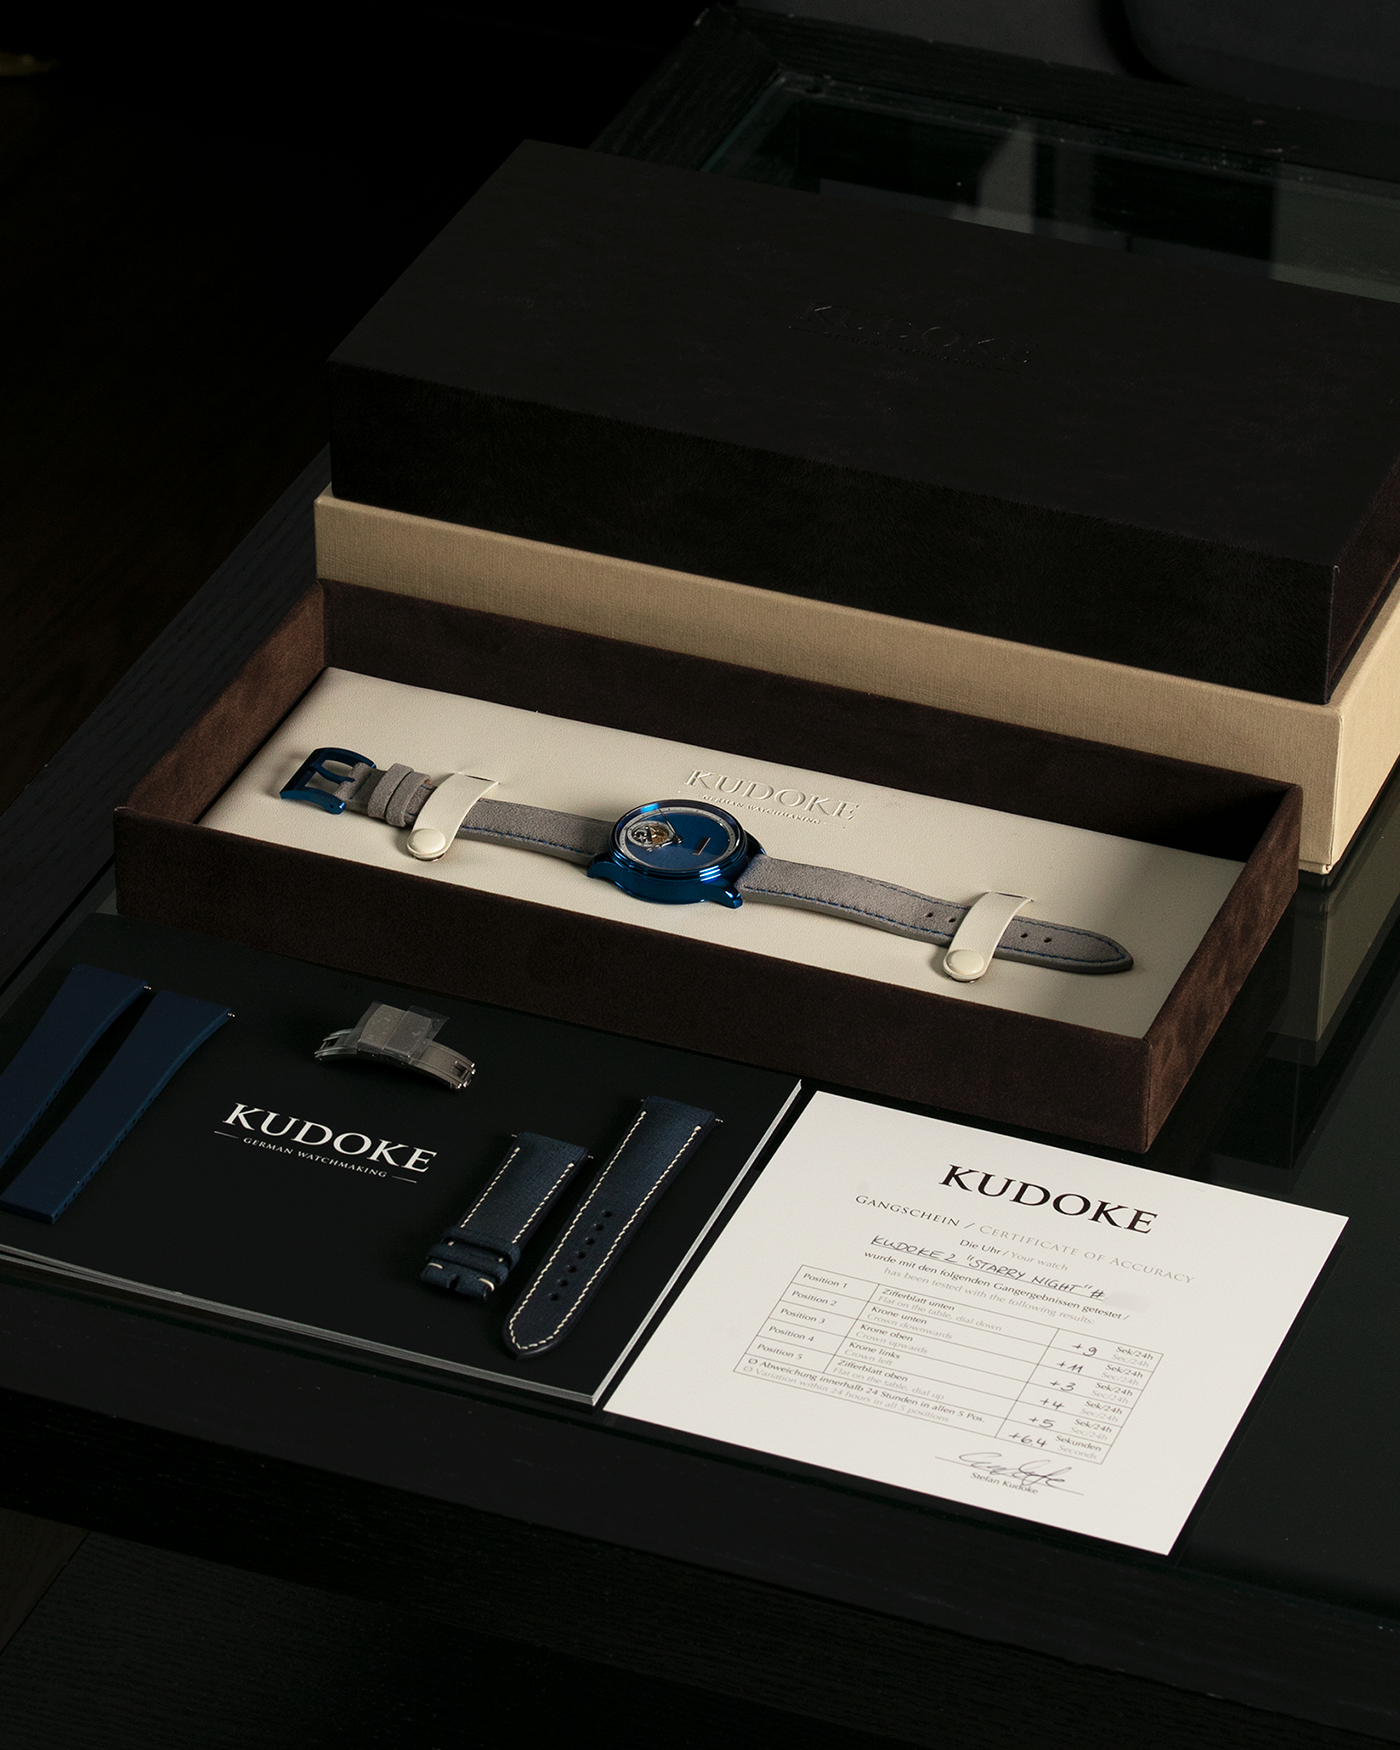 Brand: Kudoke Year: 2022 Model: Kudoke 2 ‘Starry Night’ Grail Watch 8, Limited Edition of 30 pieces Material: Grade 5 Titanium with CVD Blue Finish Movement: In-house Kaliber 1-24H, Manual-Winding Case Diameter: 39mm Strap: Grey Alcantara with Bovine Calf Lining and Blue Stitching with Signed CVD Blue Grade 5 Titanium Tang Buckle, Additional Delugs Navy CTS Rubber Strap, and Delugs Denim Bable Signature Strap